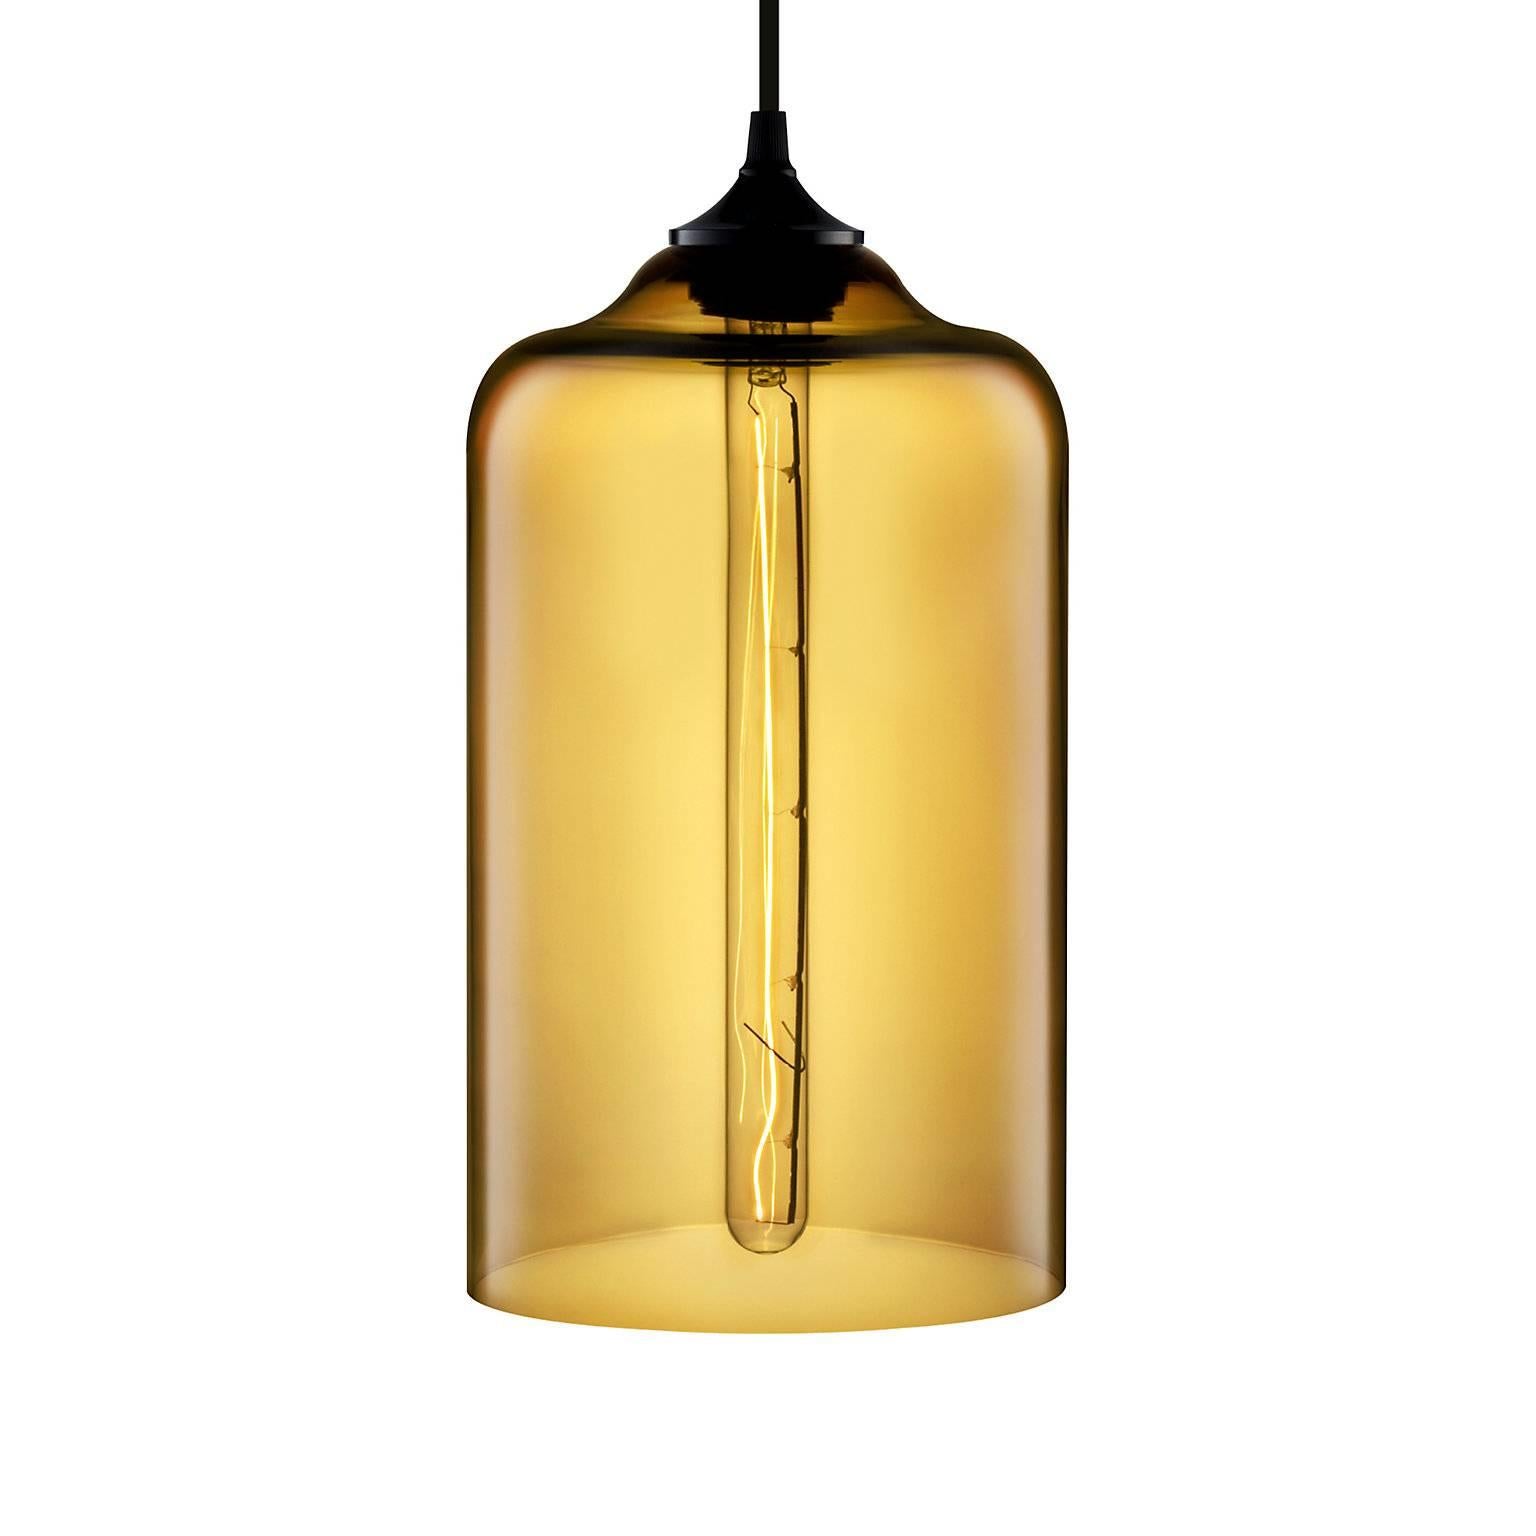 Celebrating iconic design, the bell jar and its sleeker companion, the Bella, cast glorious beams of light that are as warm as they are welcoming. Every single glass pendant light that comes from Niche is handblown by real human beings in a